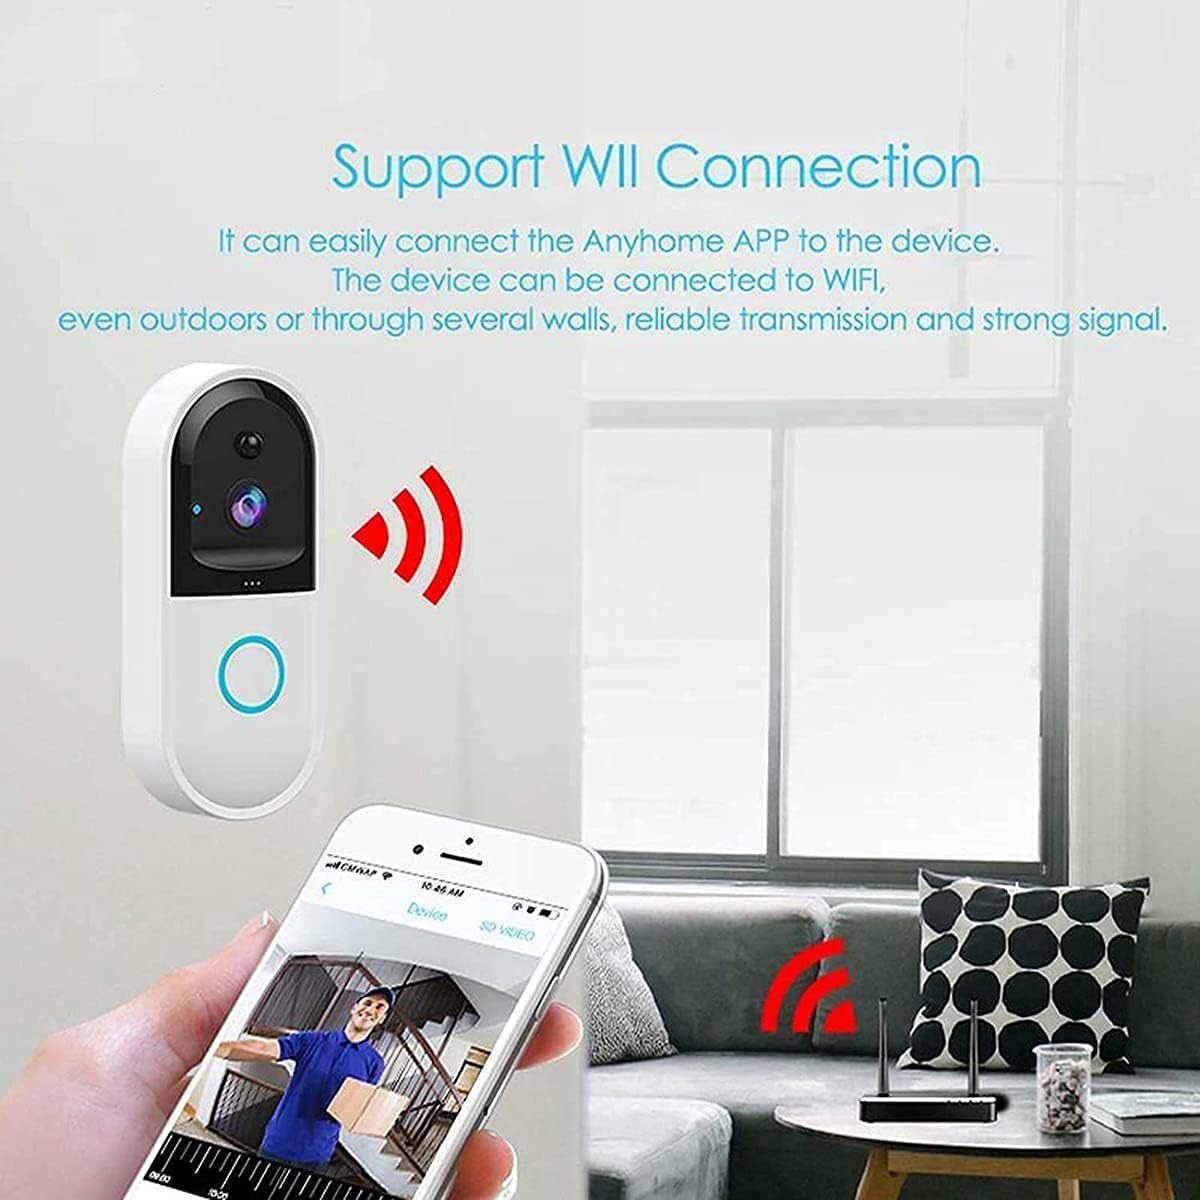 Smart  Wireless Video Doorbell Camera HN-DB050 , With Two Way Audio & Live View